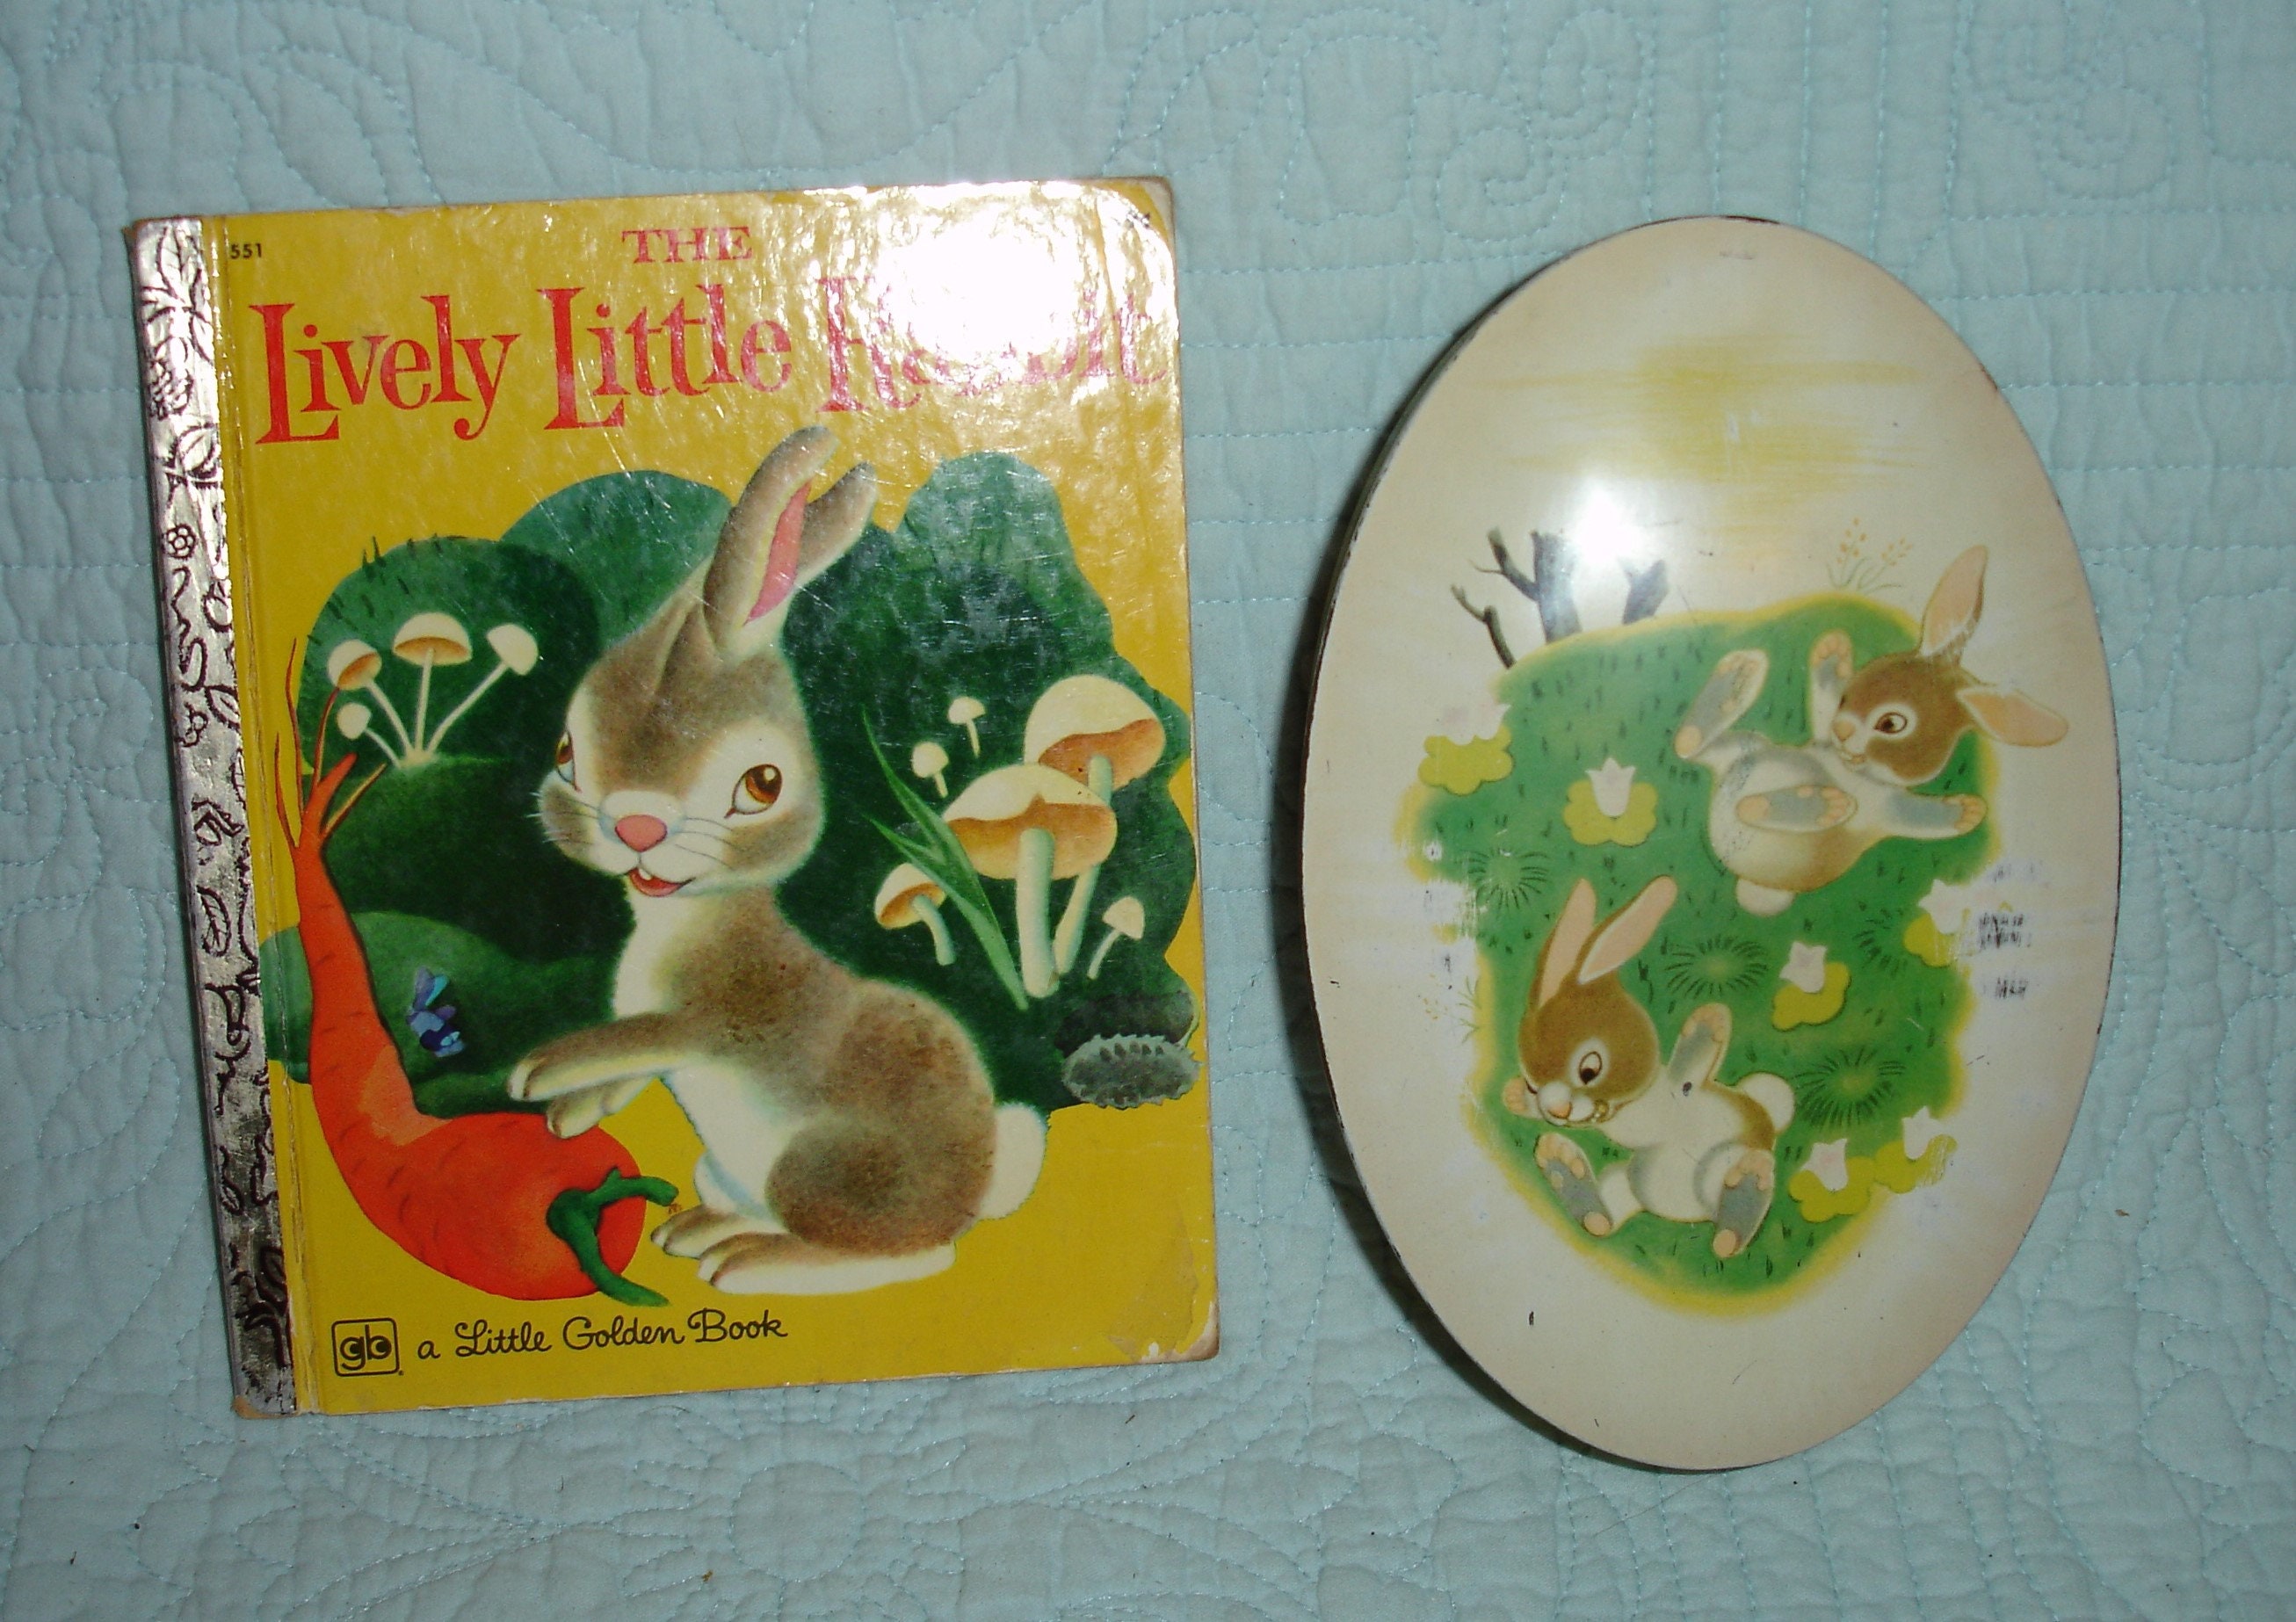 RARE 1943 Little Golden Book Tin With Lithographed Scenes of lively Little  Rabbit, Made by the Metal Box Co Mansfield, England 